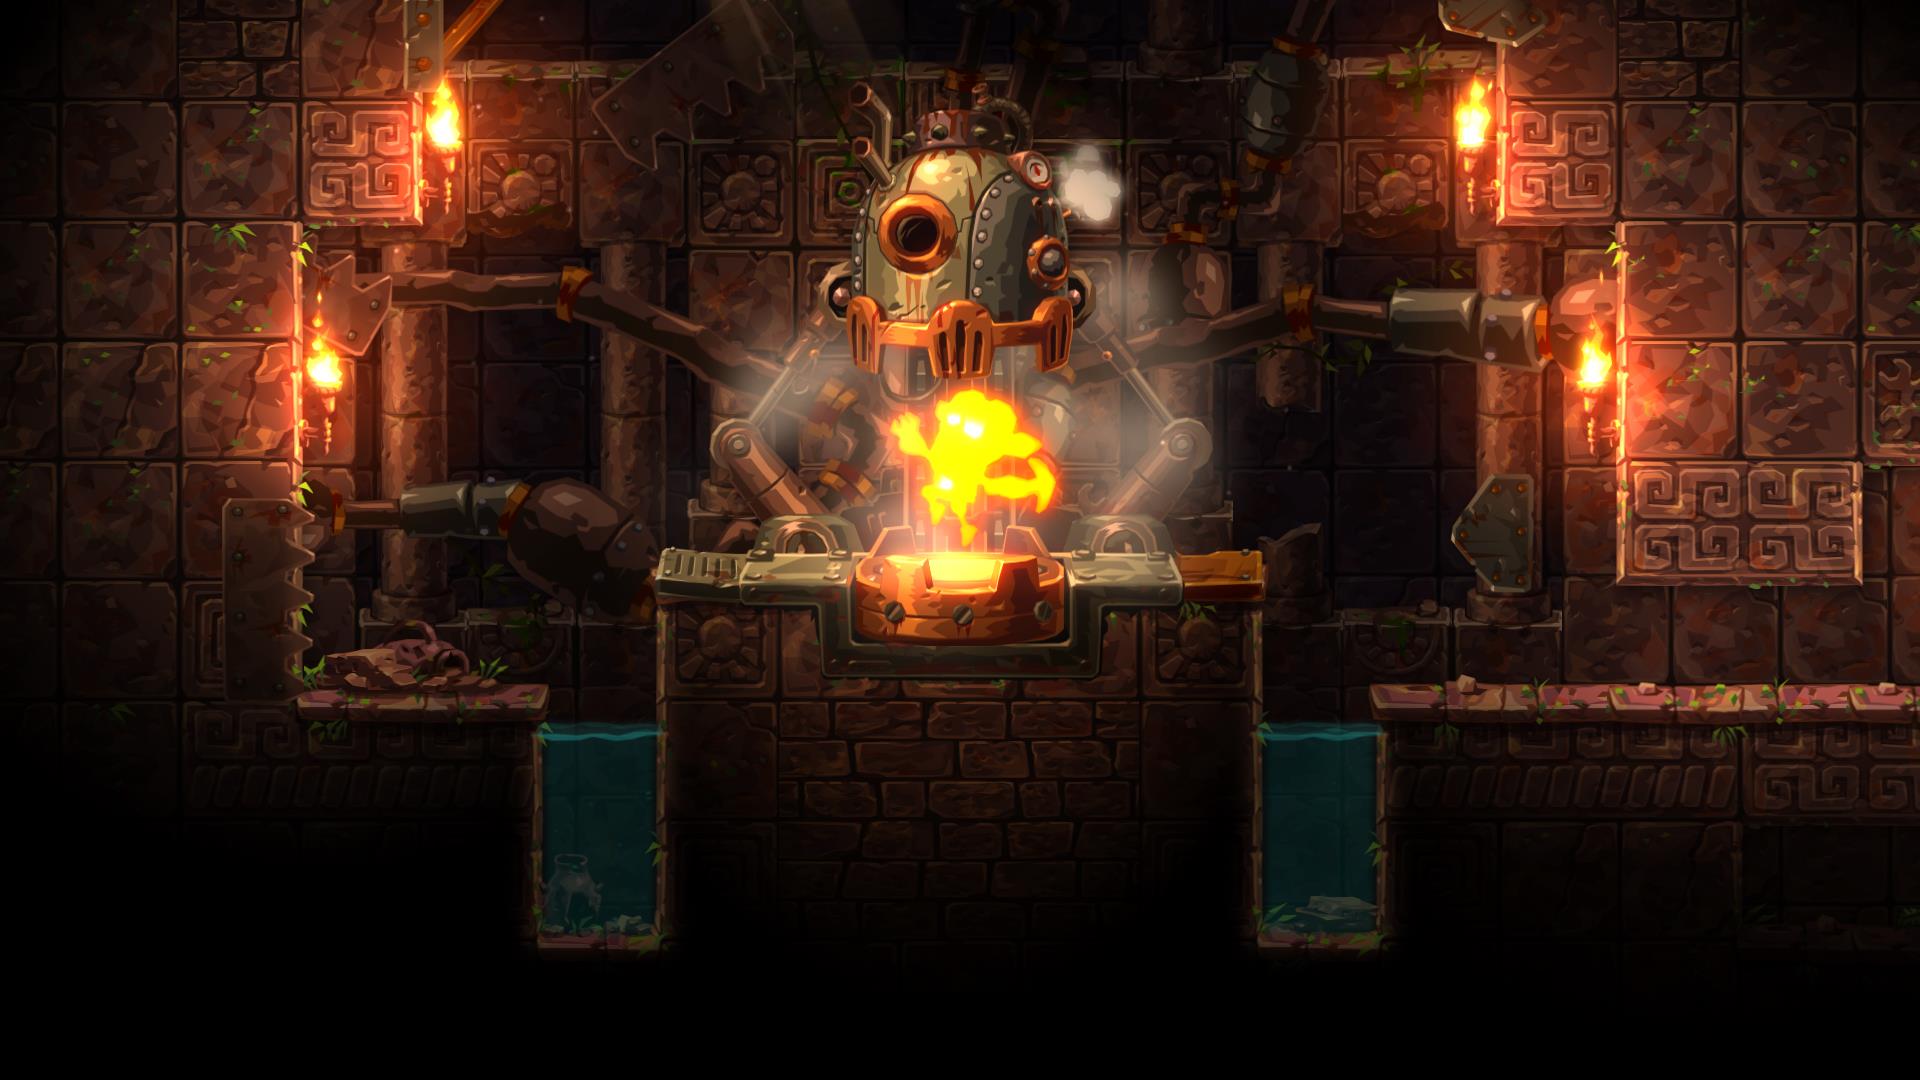 HD desktop wallpaper of a scene from SteamWorld Dig 2, featuring an intricate machine in a dimly lit underground setting.